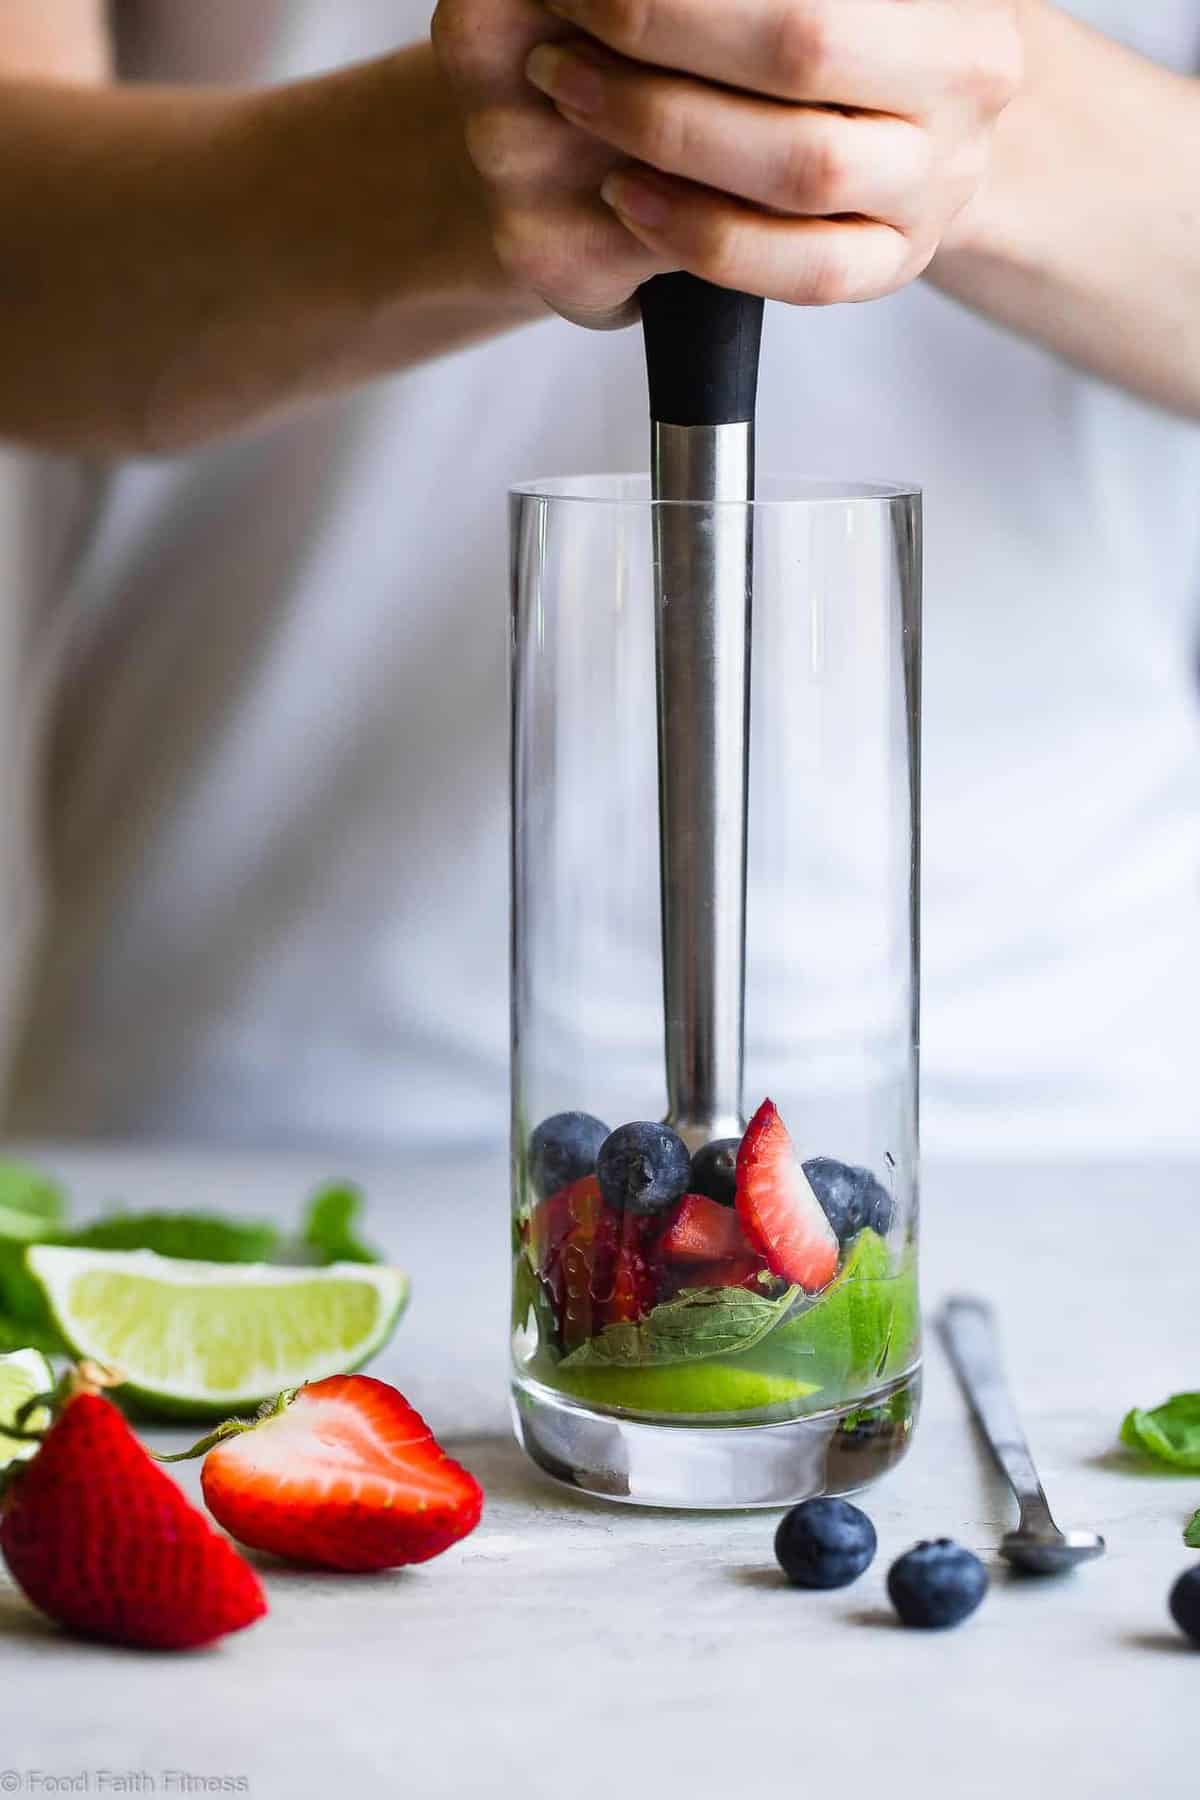 Red White and Blueberry Coconut Mojitos - This coconut blueberry mojito recipe with strawberries is a healthier, gluten free, easy Summer drink with only 130 calories and no sugar! Perfect for July 4th! | #Foodfaithfitness | #Mojito #July4th #Healthy #SugarFree #Glutenfree